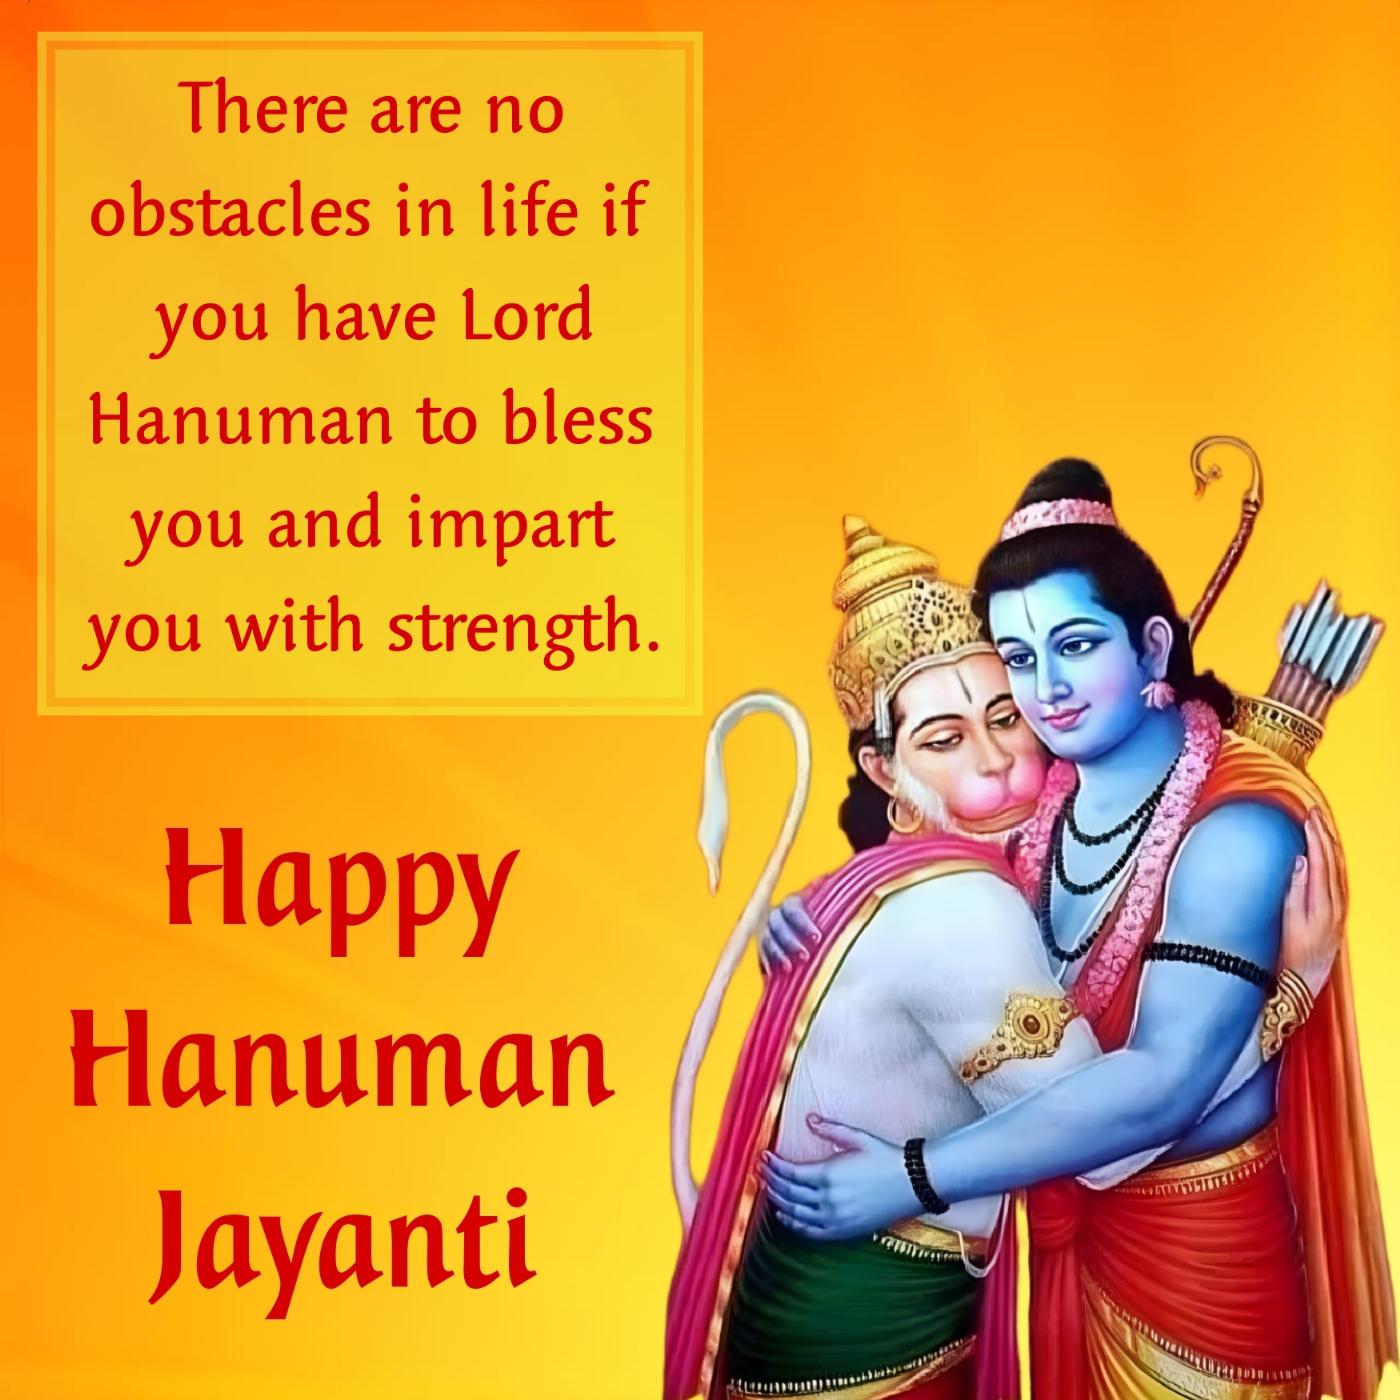 There are no obstacles in life if you have Lord Hanuman